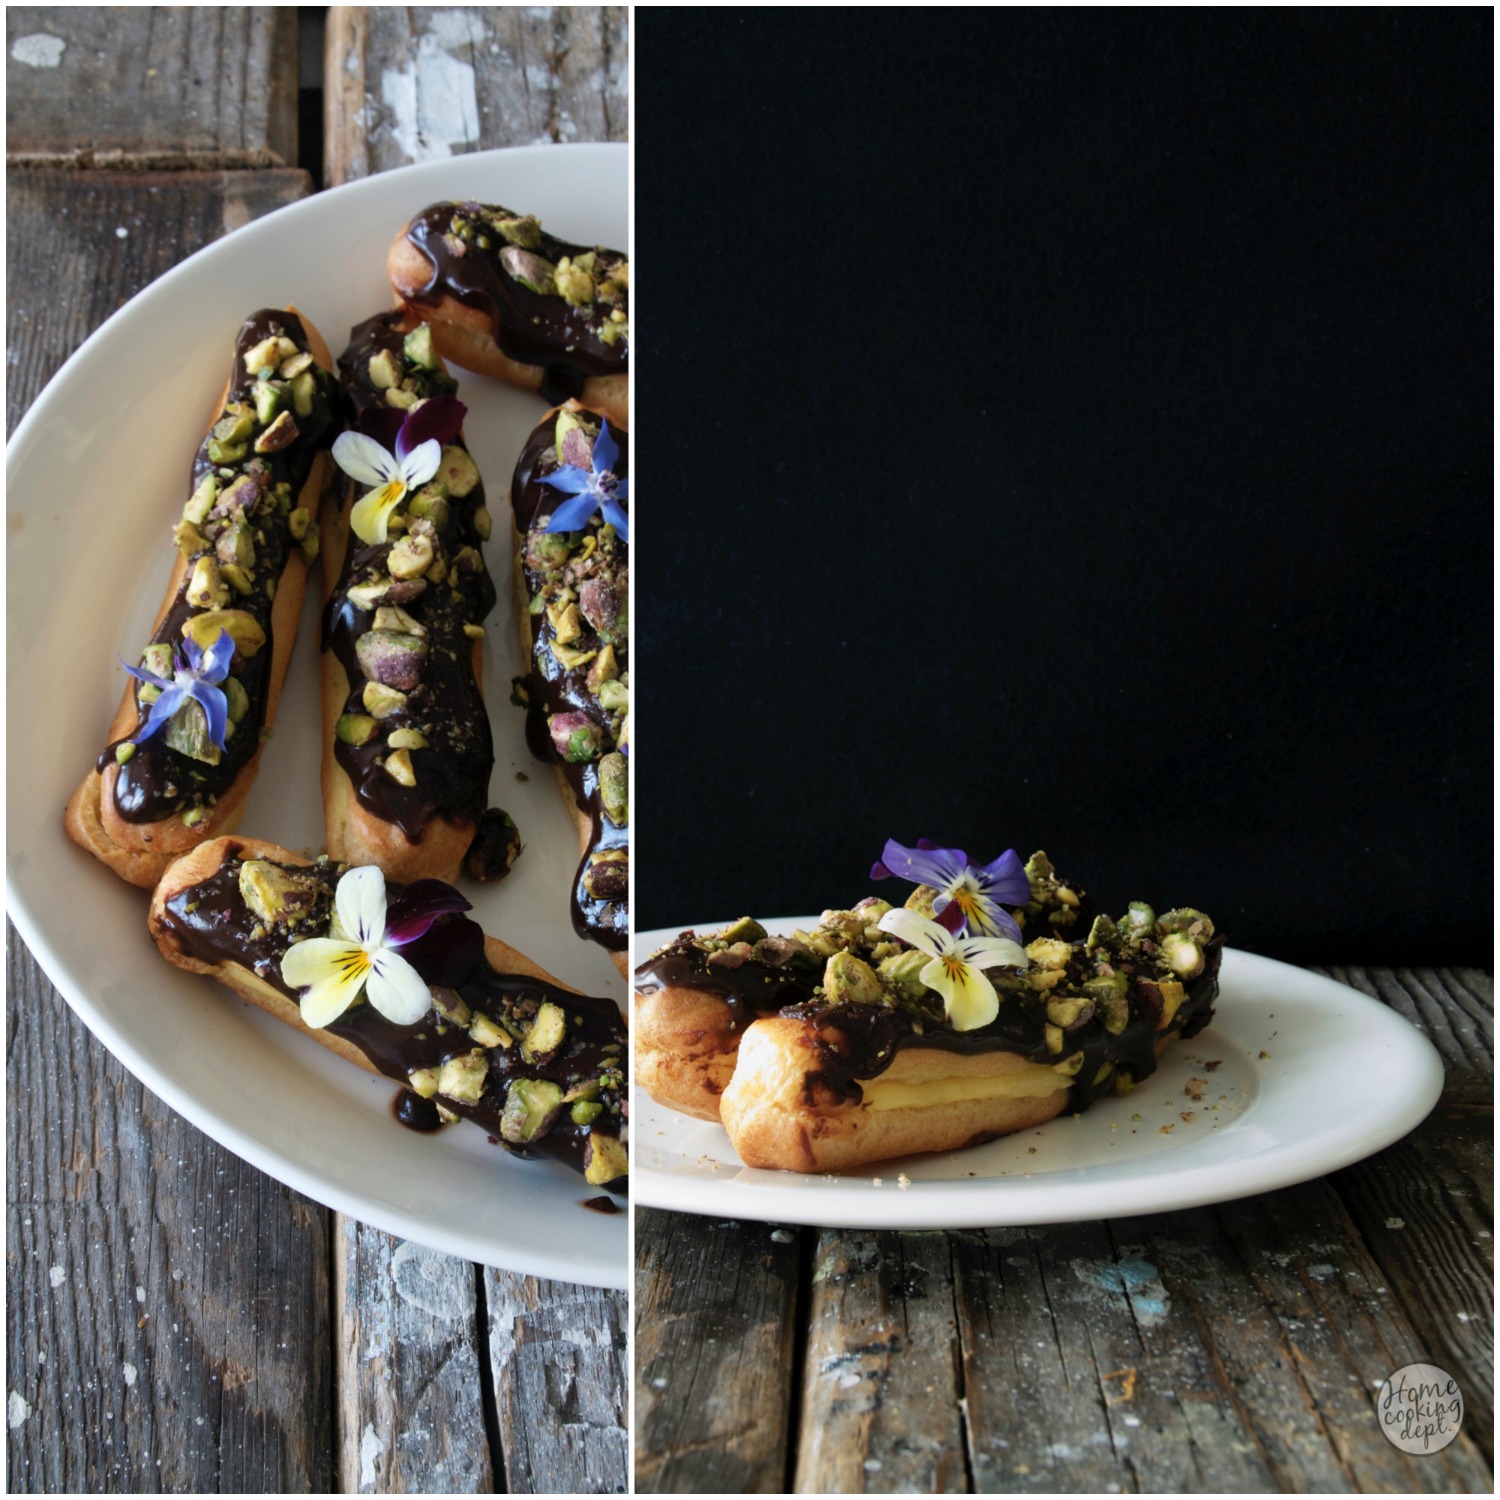 Pretty Éclairs / Homecooking dept.